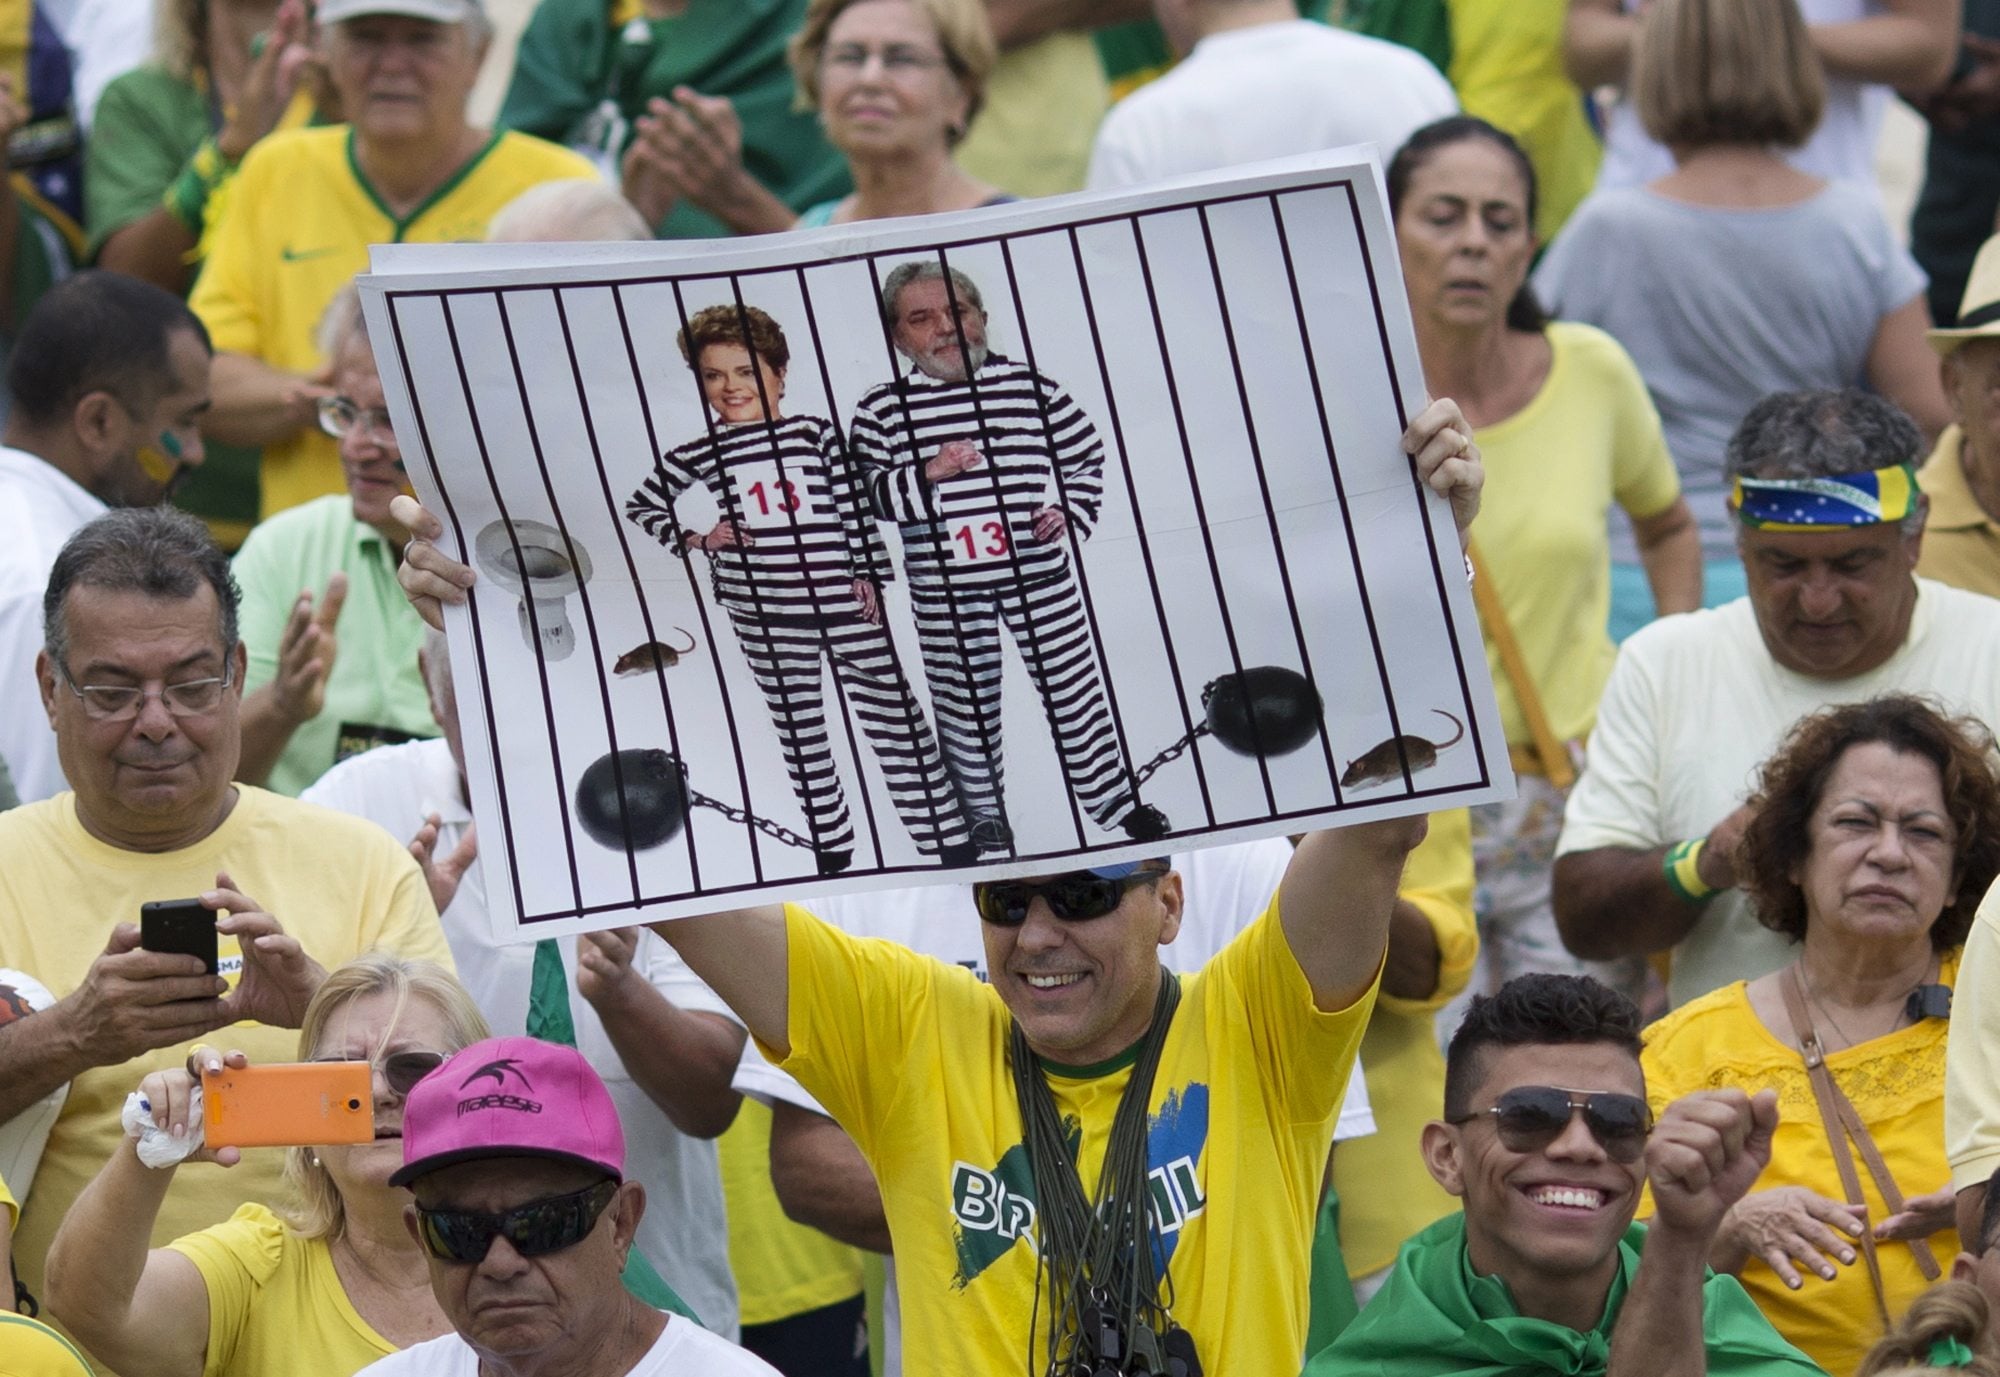 A demonstrator holds a poster with the photo of Brazilian president Dilma Rousseff and former President Luiz Inacio Lula da Silva in prison stripes during a protest on Copacabana beach in Rio de Janeiro, Brazil. It was the best of times in 2009 when Rio was awarded the games, championed by then-President Luiz Inacio Lula da Silva. He called it a &quot;sacred day&quot; and praised the &quot;strength of Brazil&#039;s economy,&quot; which shrank by 4 percent in 2015 with no improvement in sight.